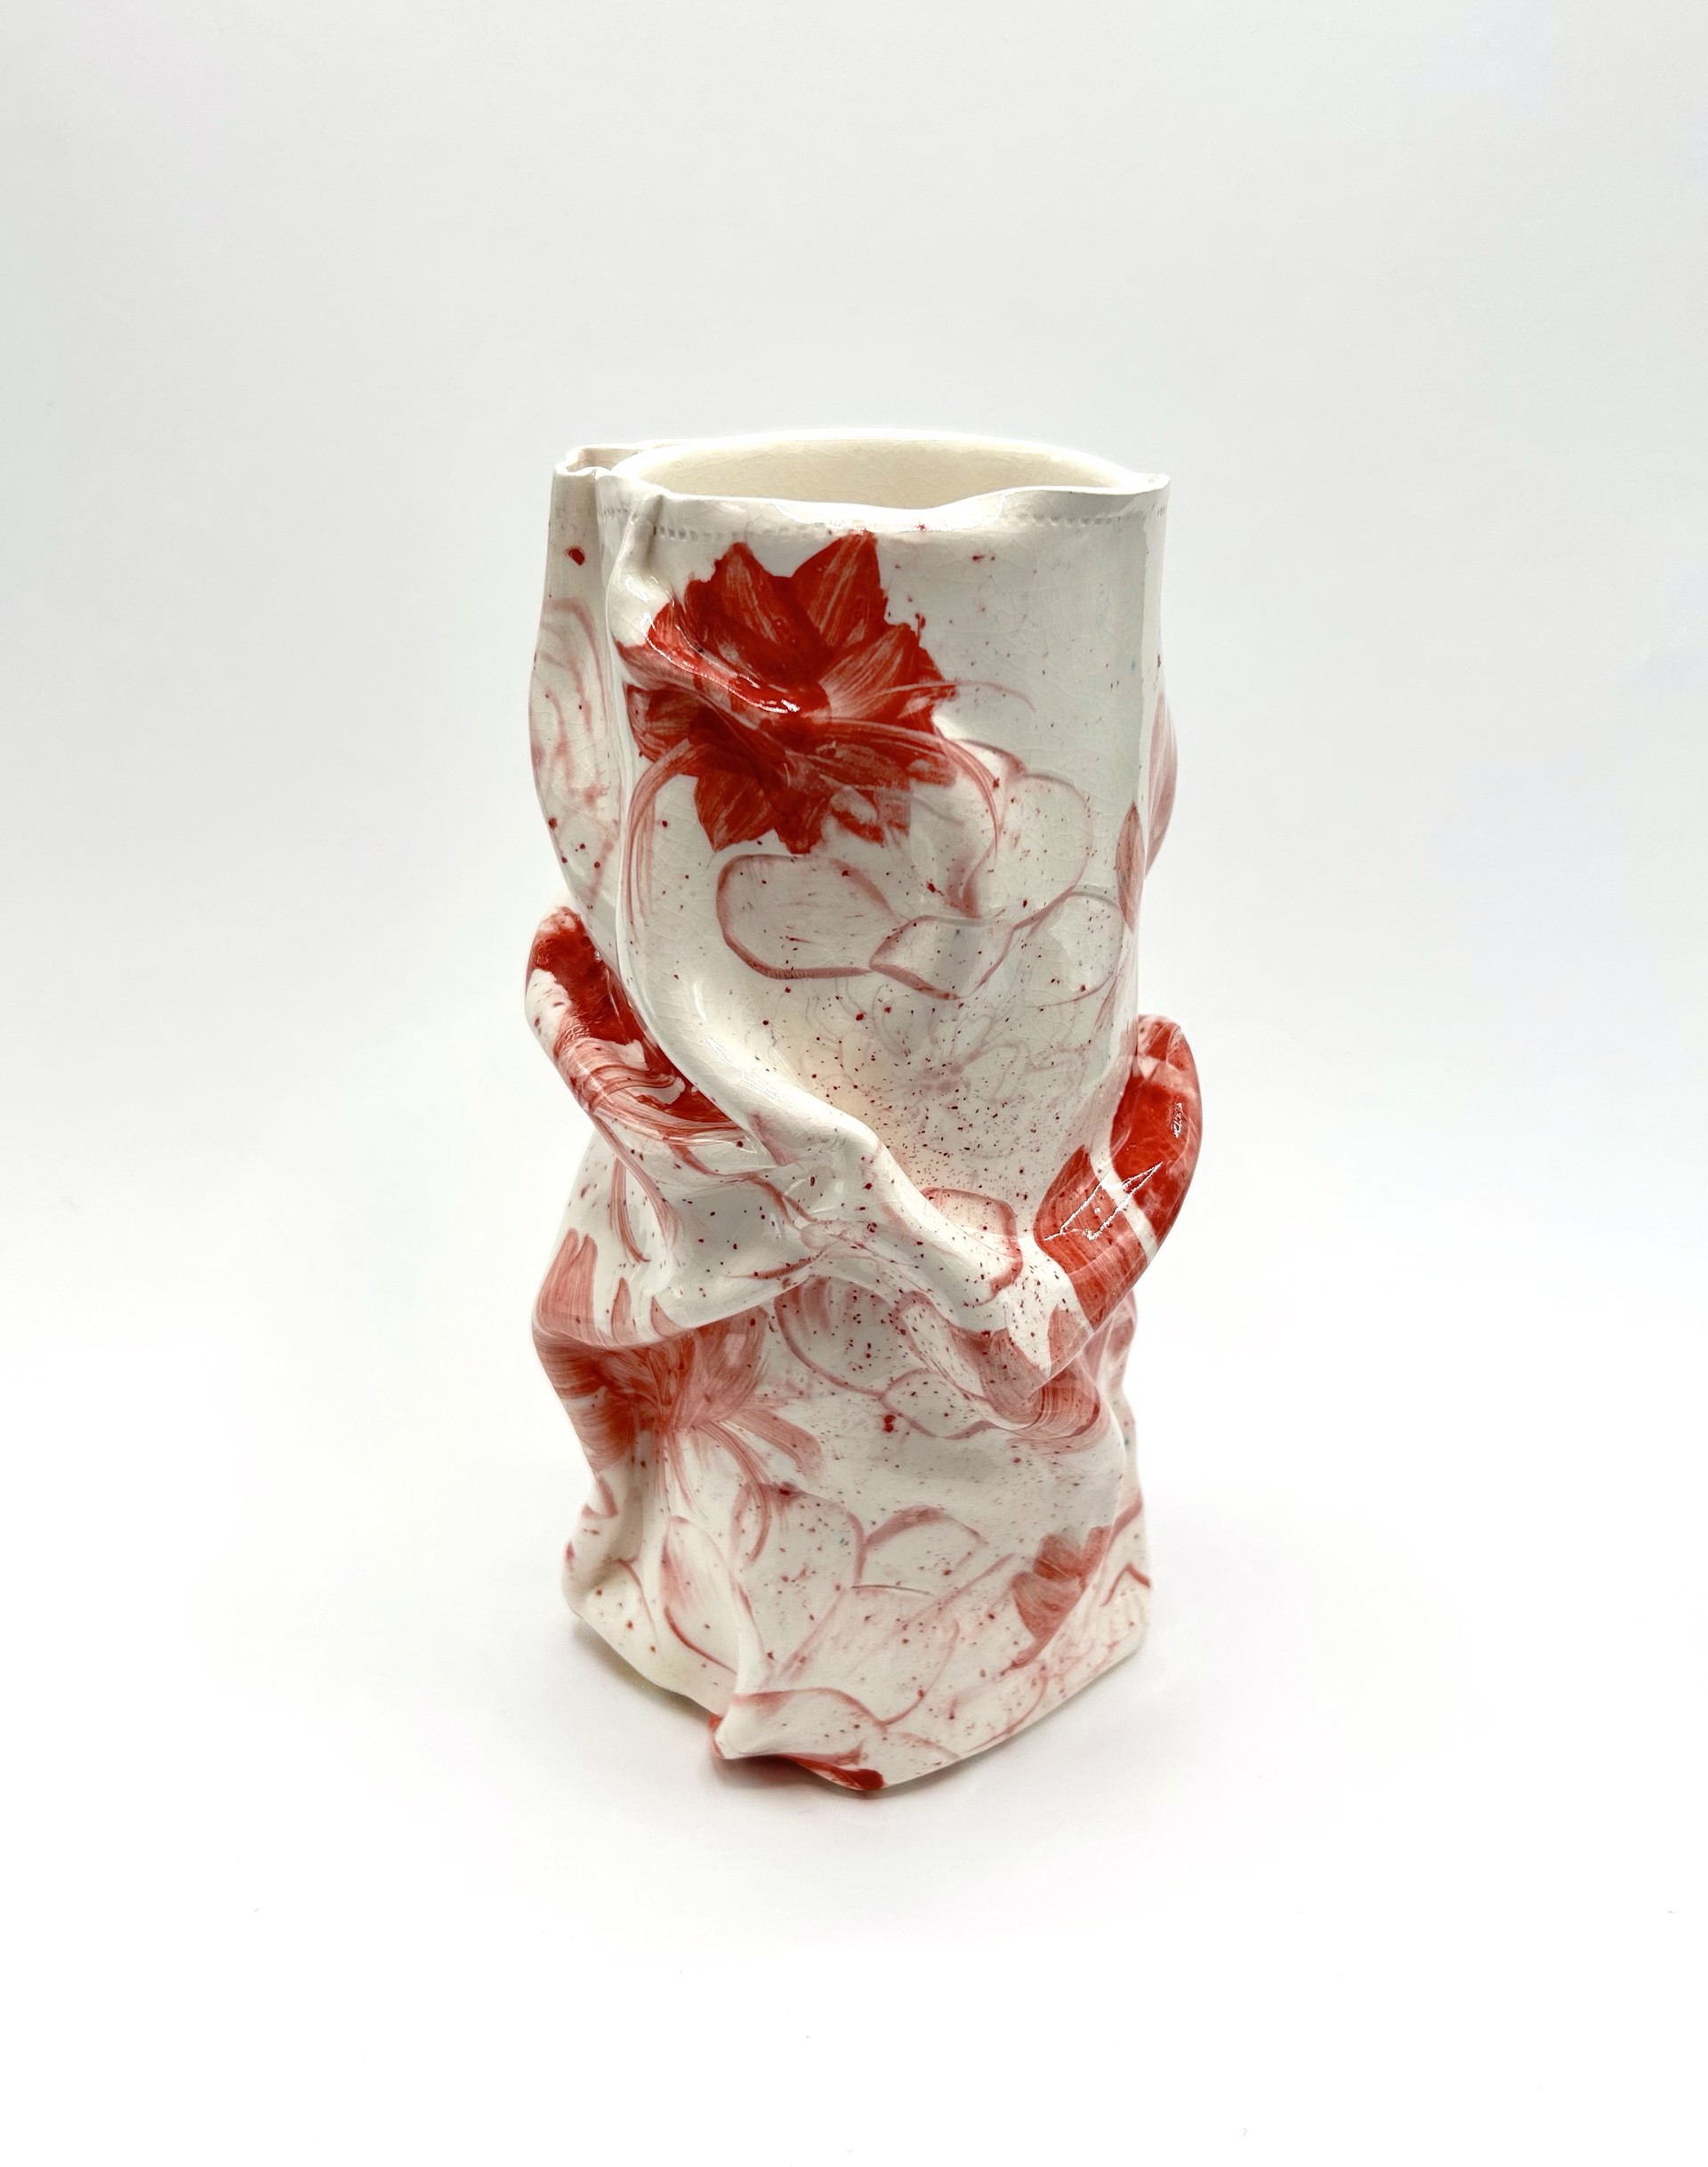 Wrinkled Vase with Red Flowers by Chandra Beadleston